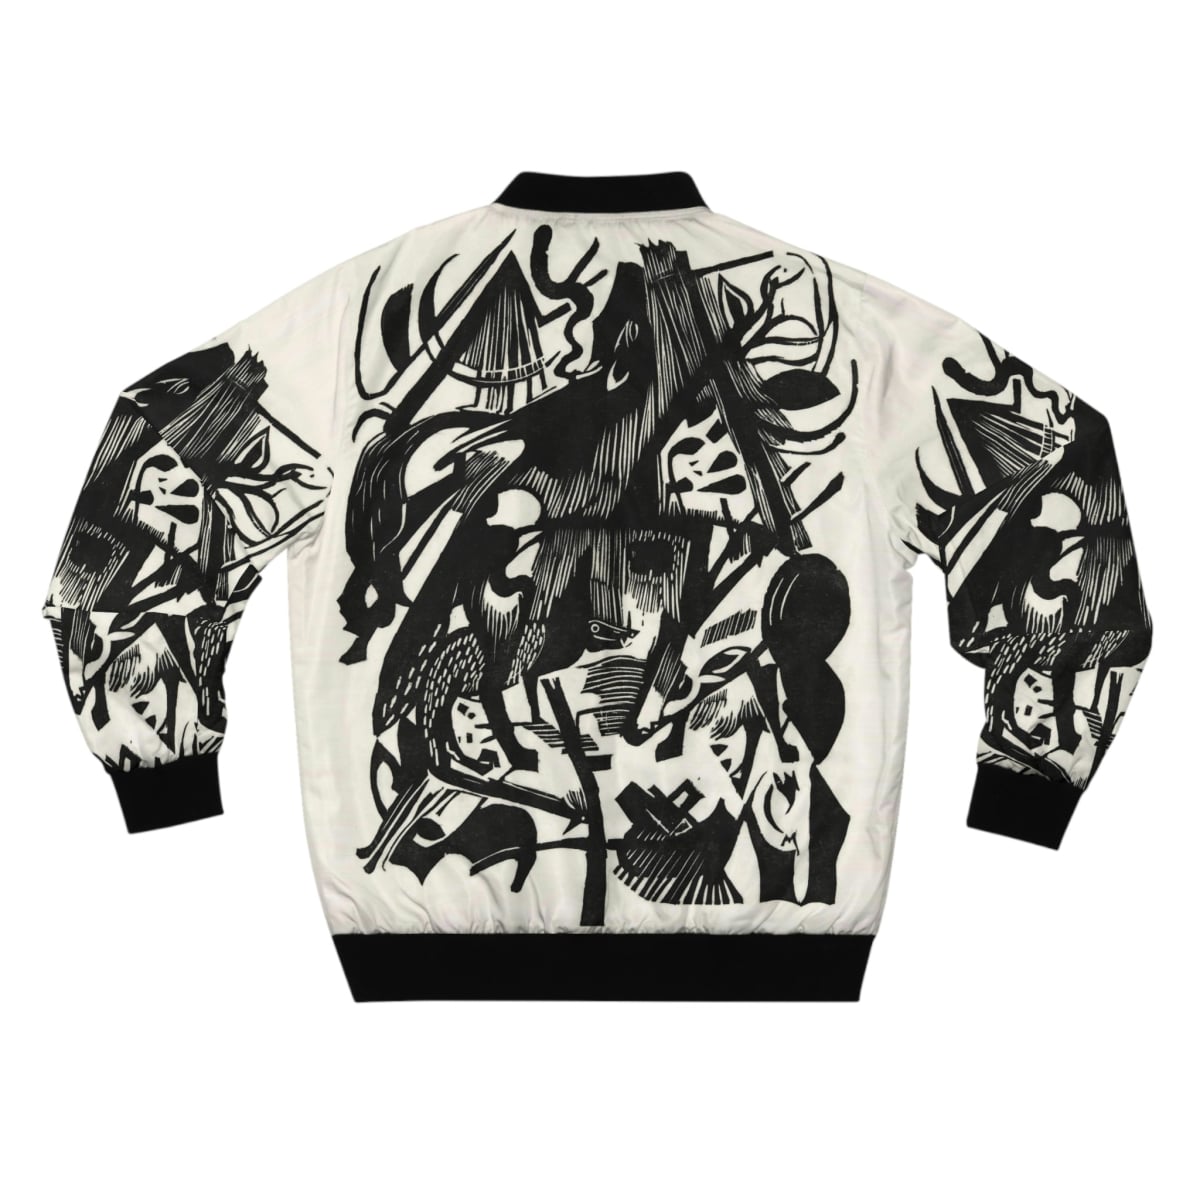 Birth of the Wolves Bomber Jacket - Painting by Franz Marc